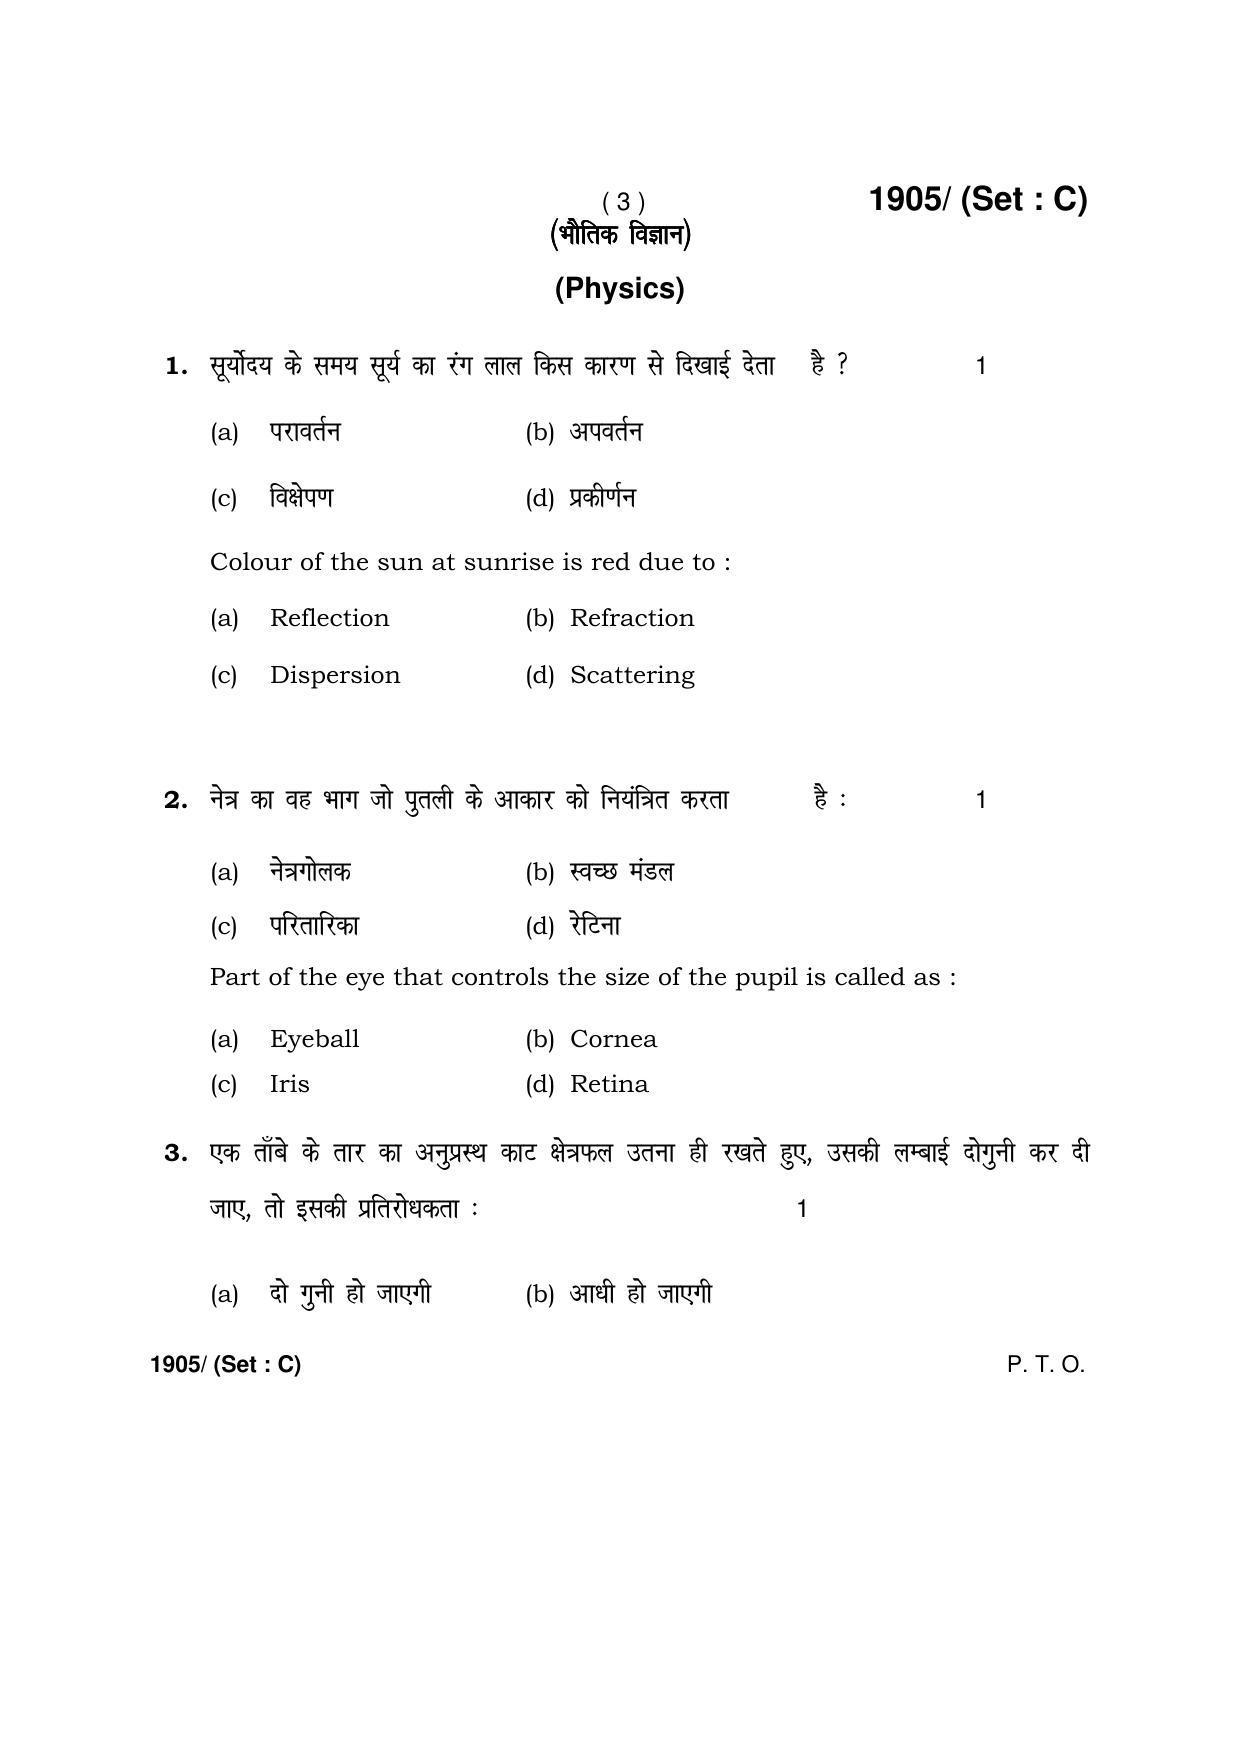 Haryana Board HBSE Class 10 Science -C 2017 Question Paper - Page 3